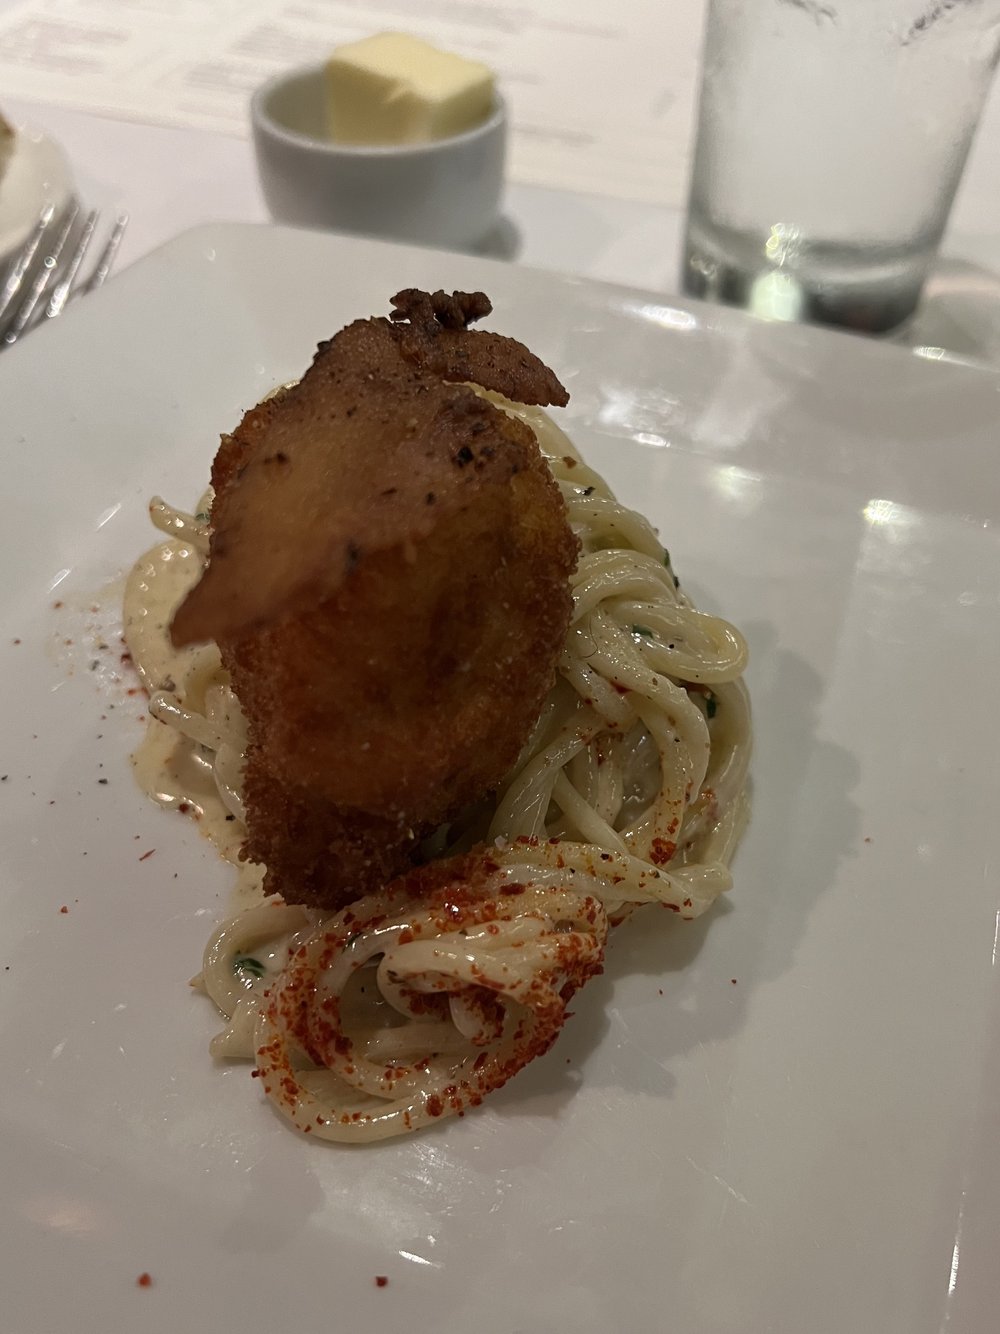 Spaghetti with fried-poached egg